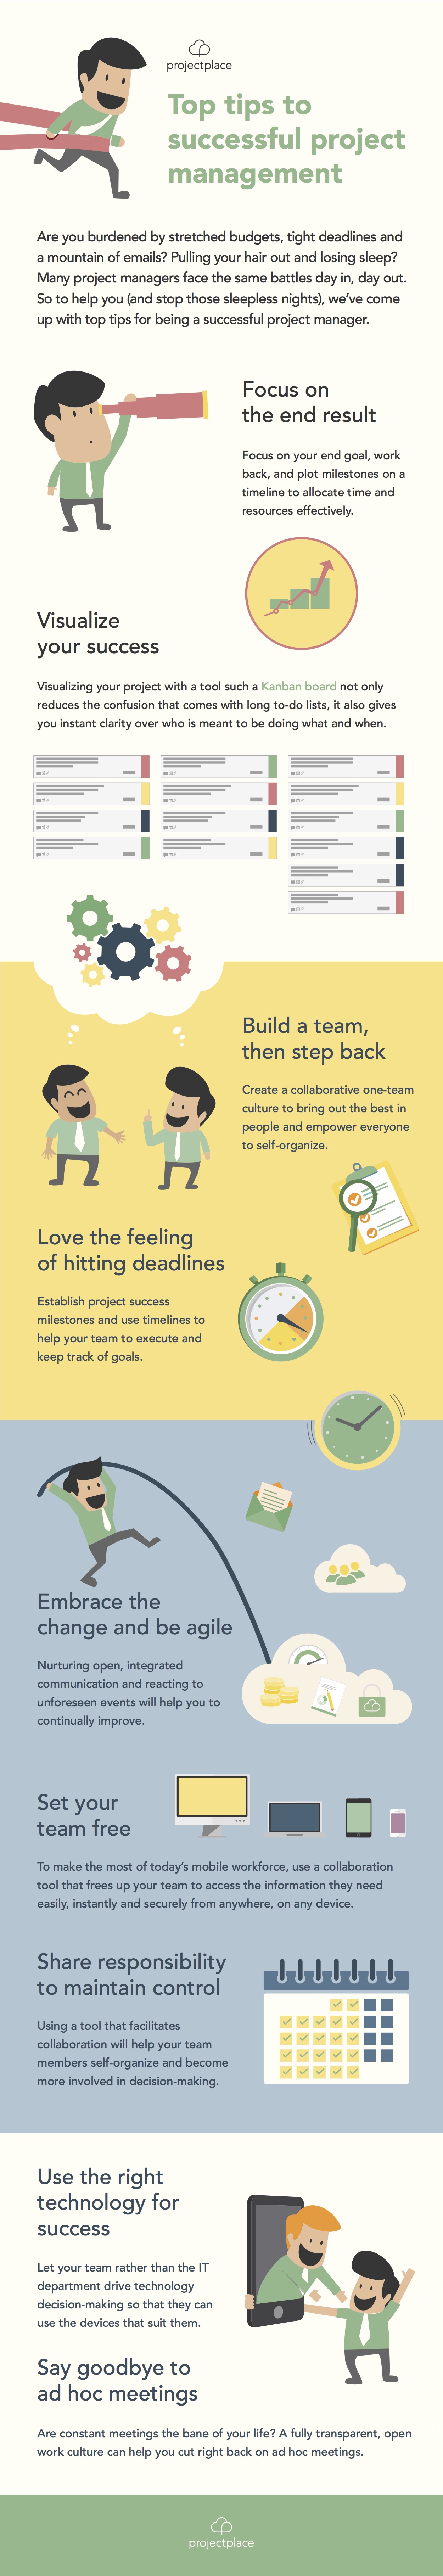 Top tips success infographic